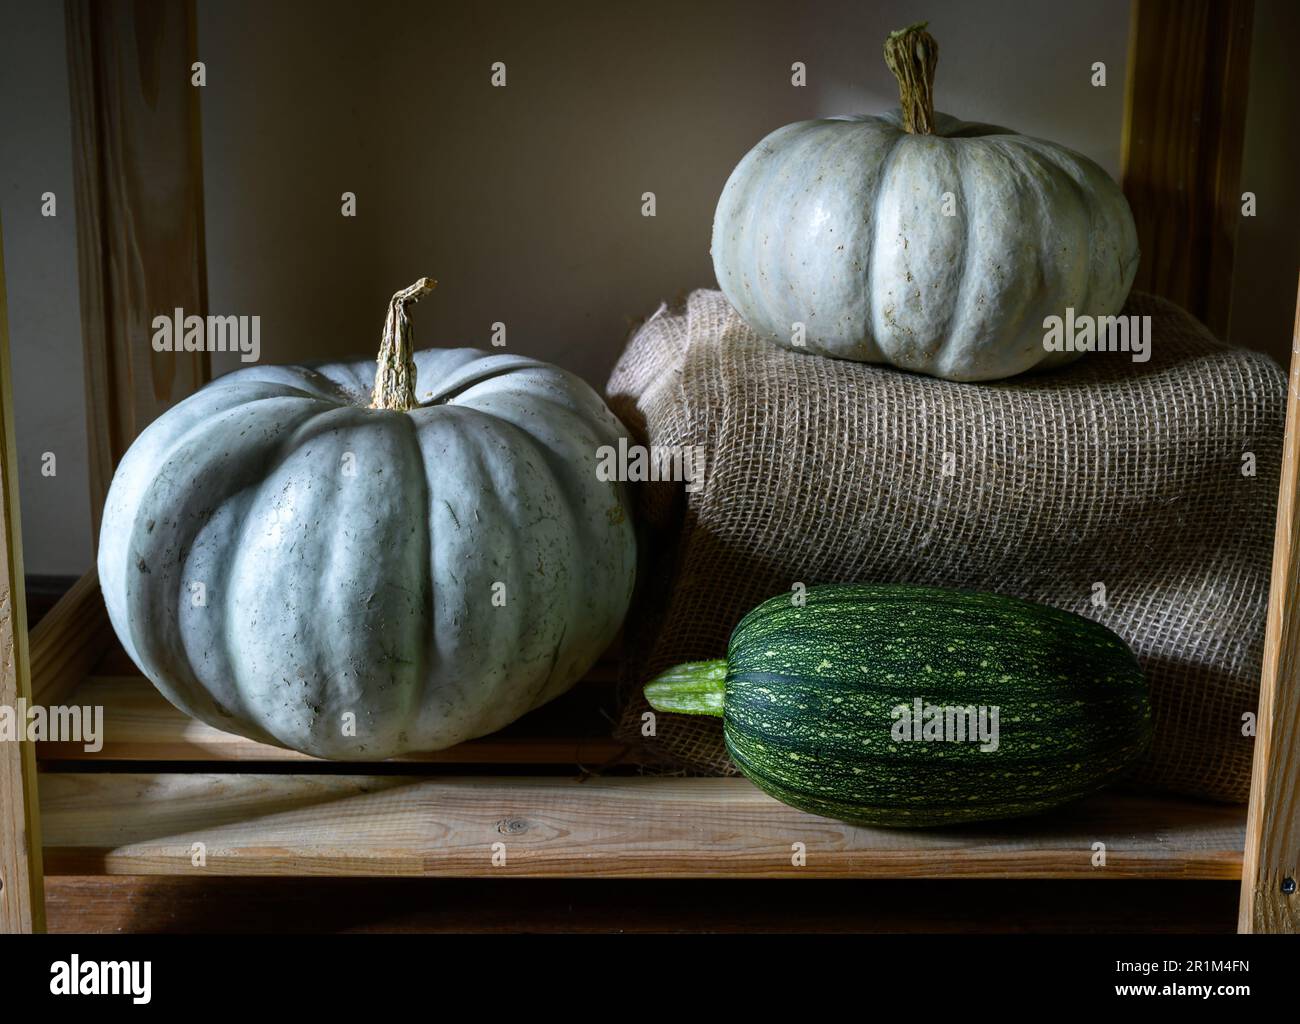 Vegetable marrow and pumpkins on wooden shelves at home, still life of organic food. Zucchini and white pumpkins in rustic interior. Harvest, thanksgi Stock Photo